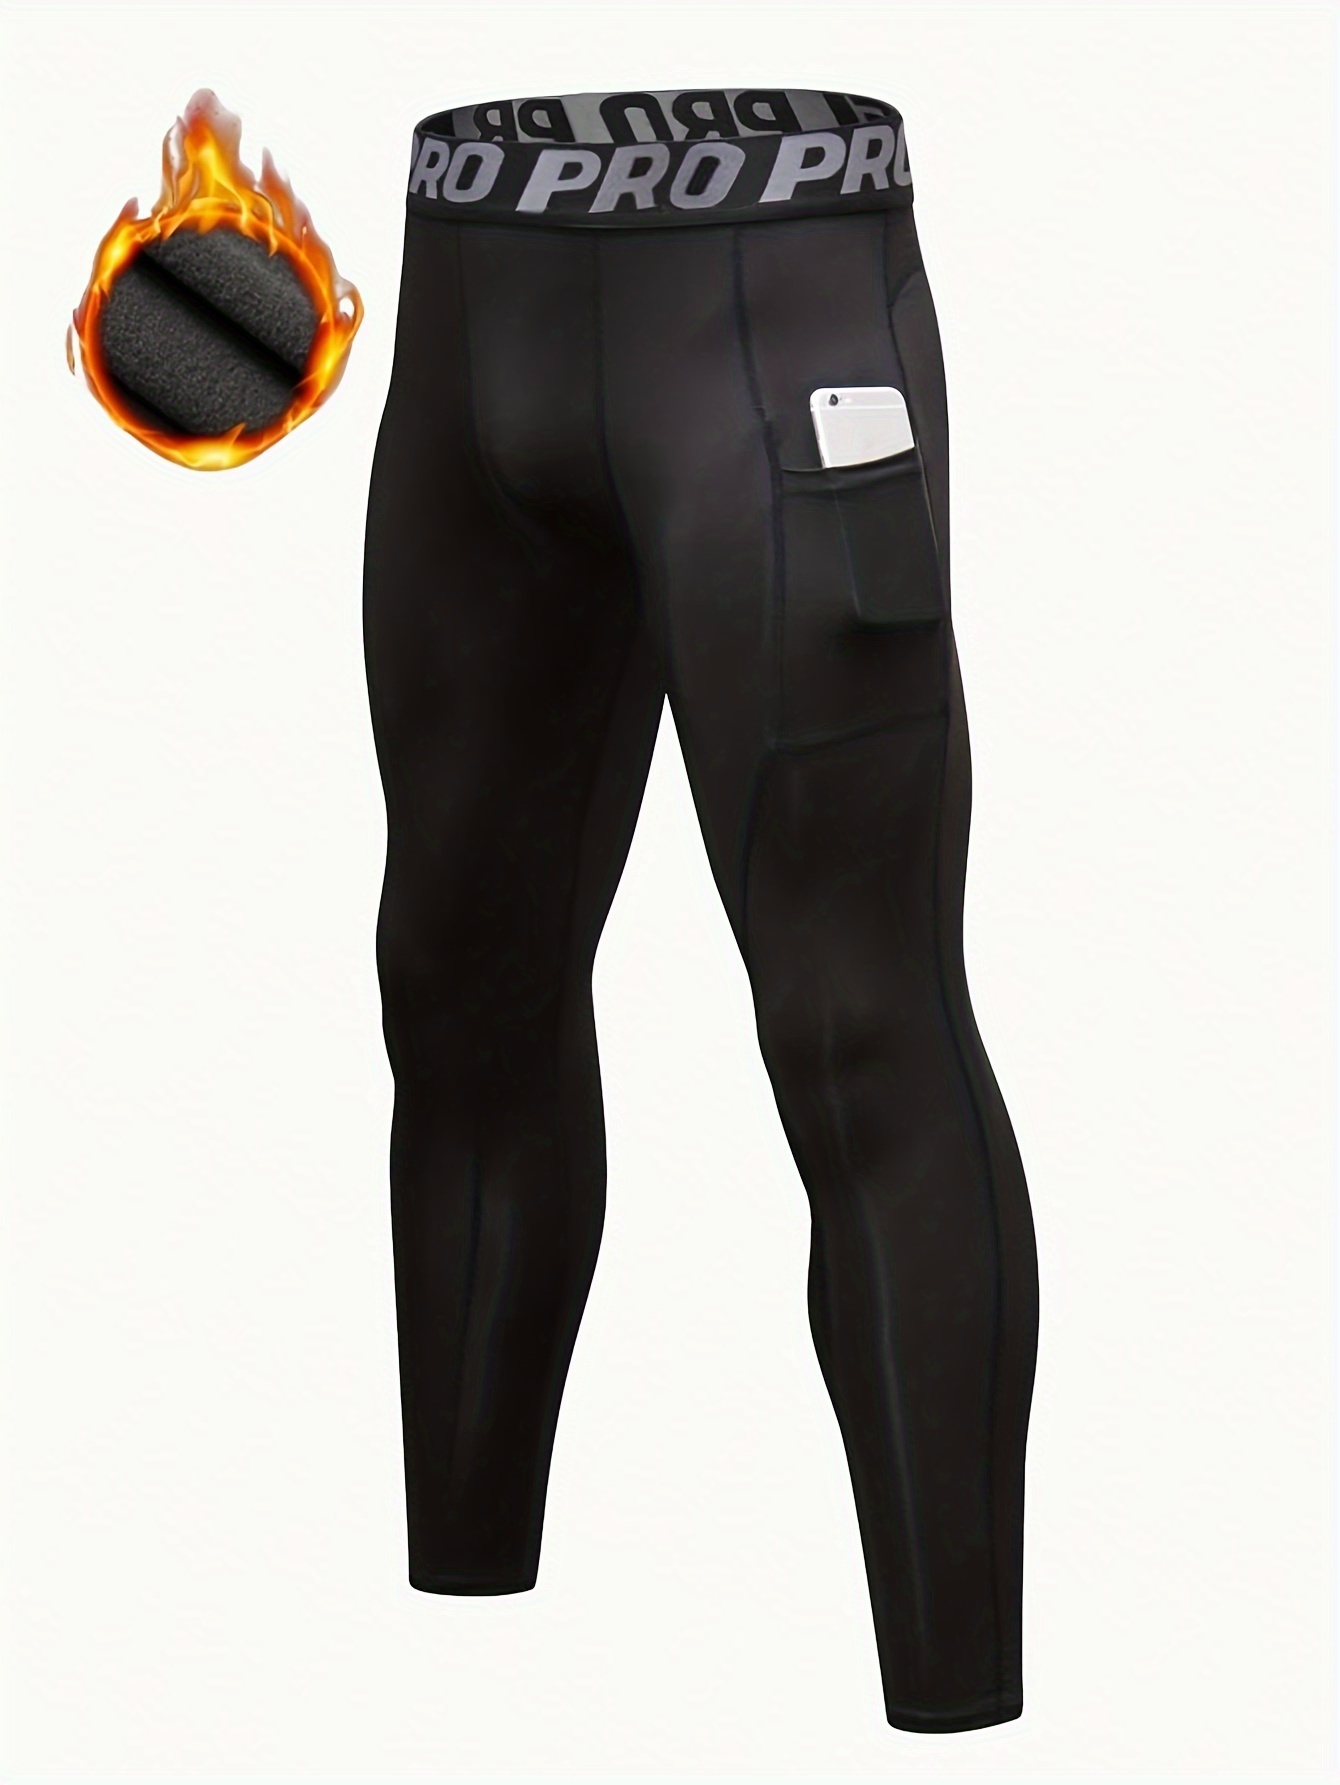 Velvet Pocket PRO Tight Stretch Running Pants For Men Autumn/Winter Compression  Mens Running Tights For Athletic Jogging And Training From Kavin4, $14.12